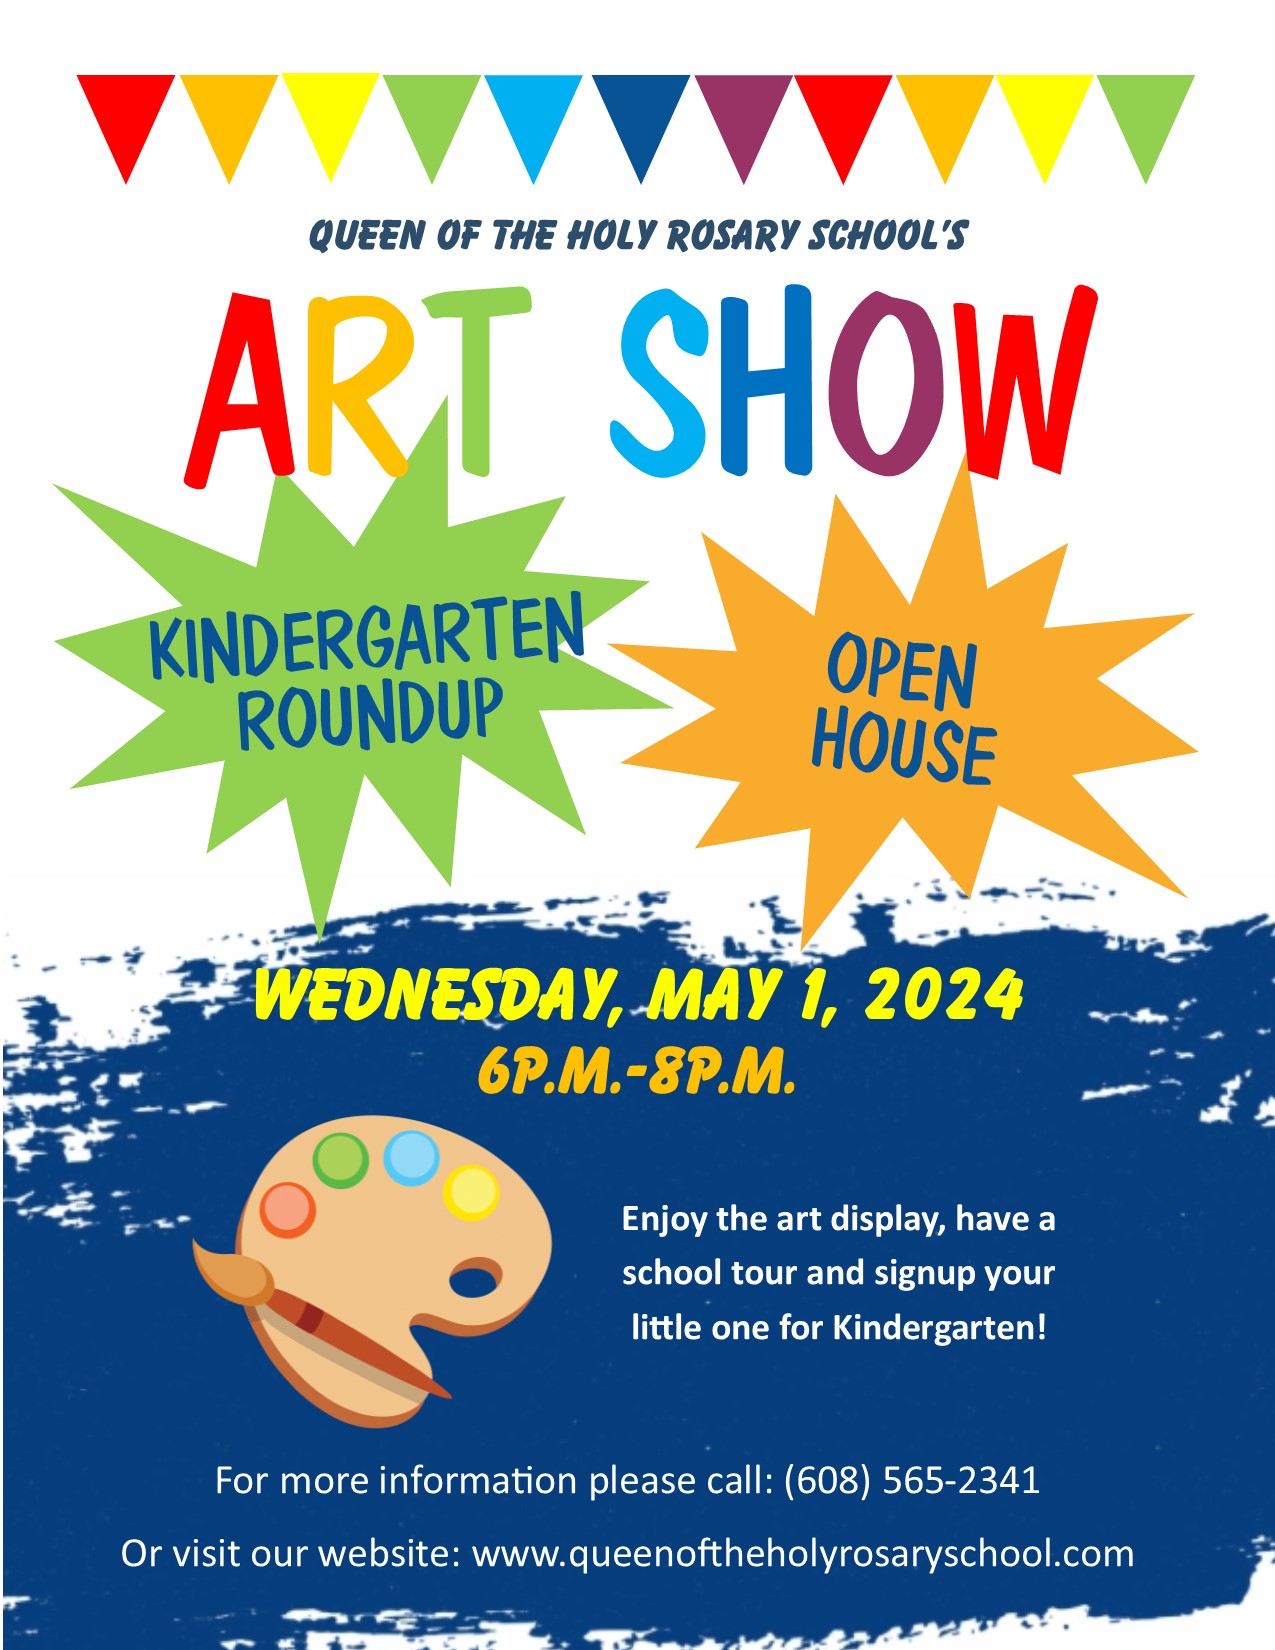 Queen of the Holy Rosary School, Necedah WI Open House, Art Show and Kindergarten Rounup May 1, 2024